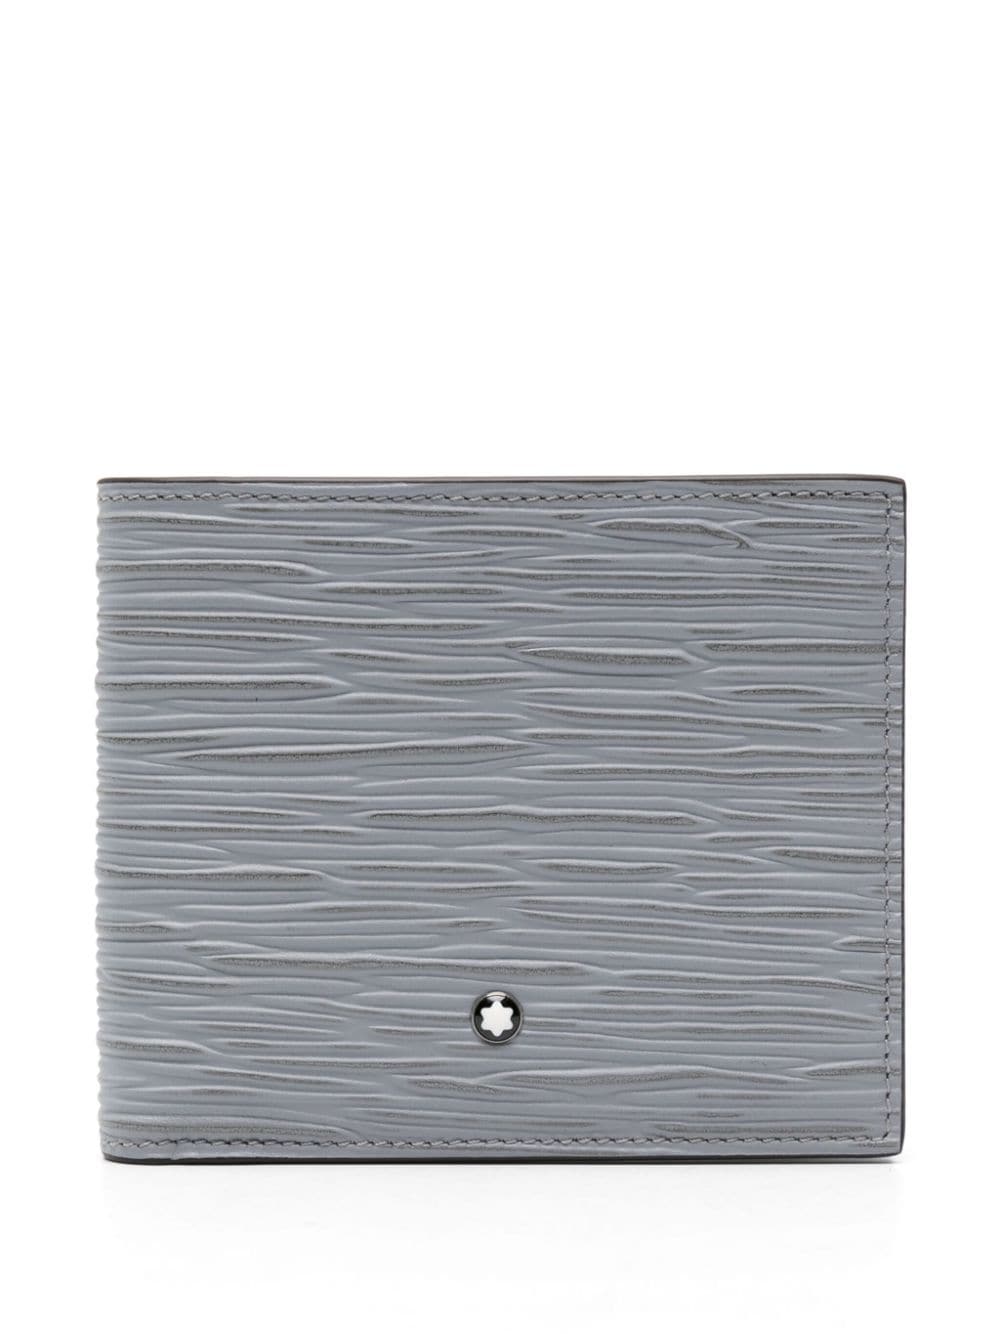 Montblanc 4810 Leather Wallet In Grey